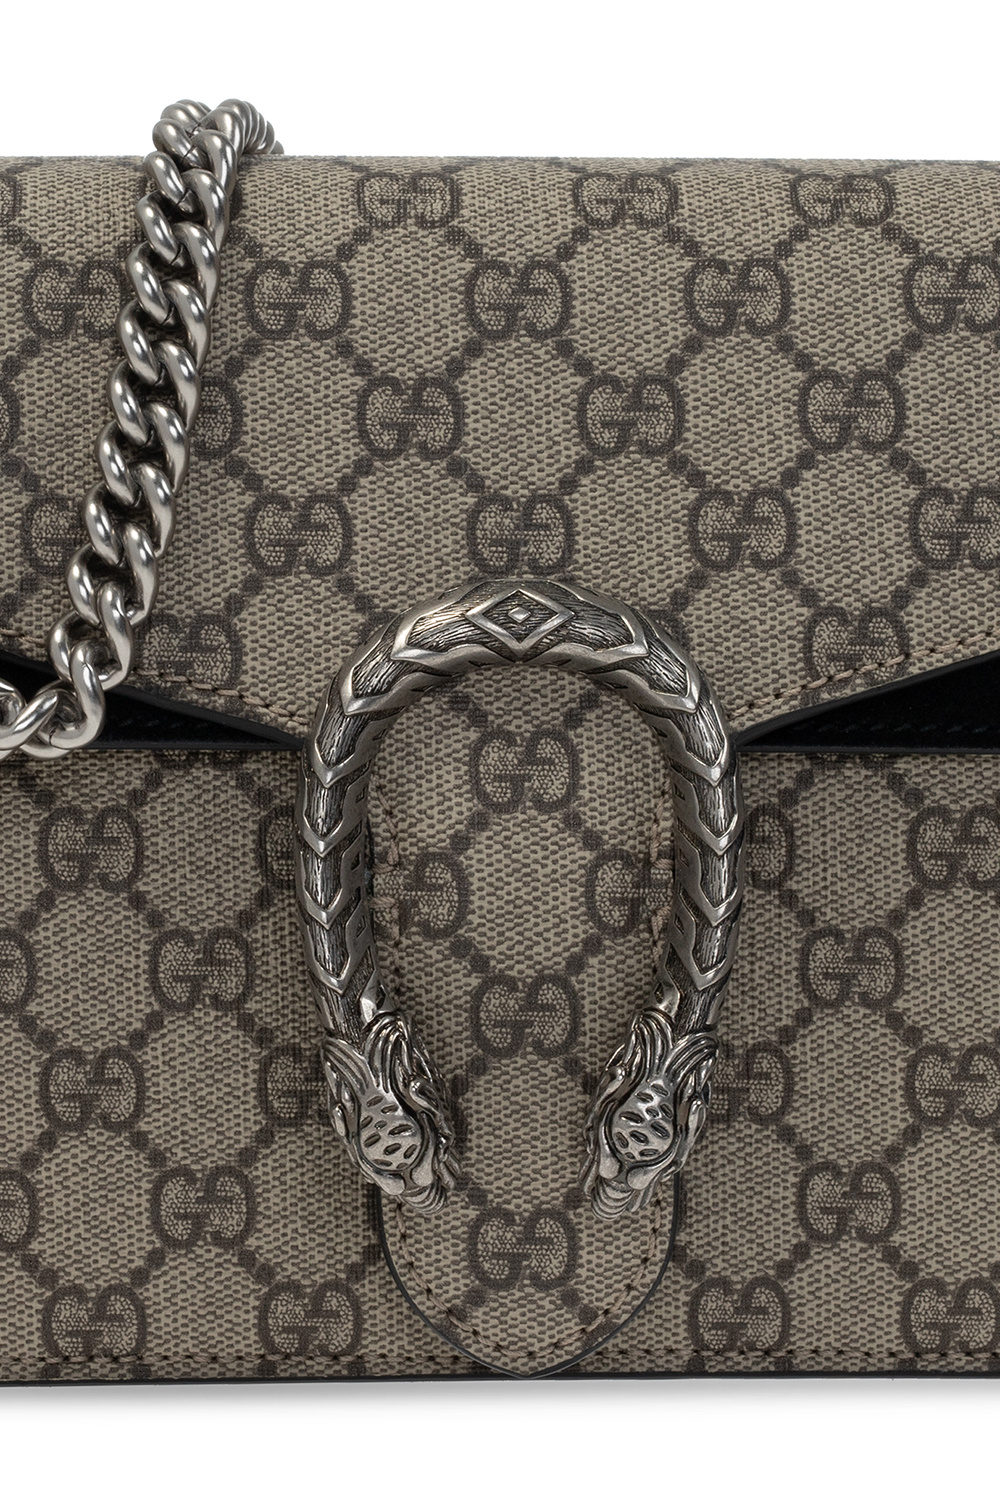 Dionysus Collection - Luxury Chain Strap Shoulder Bags